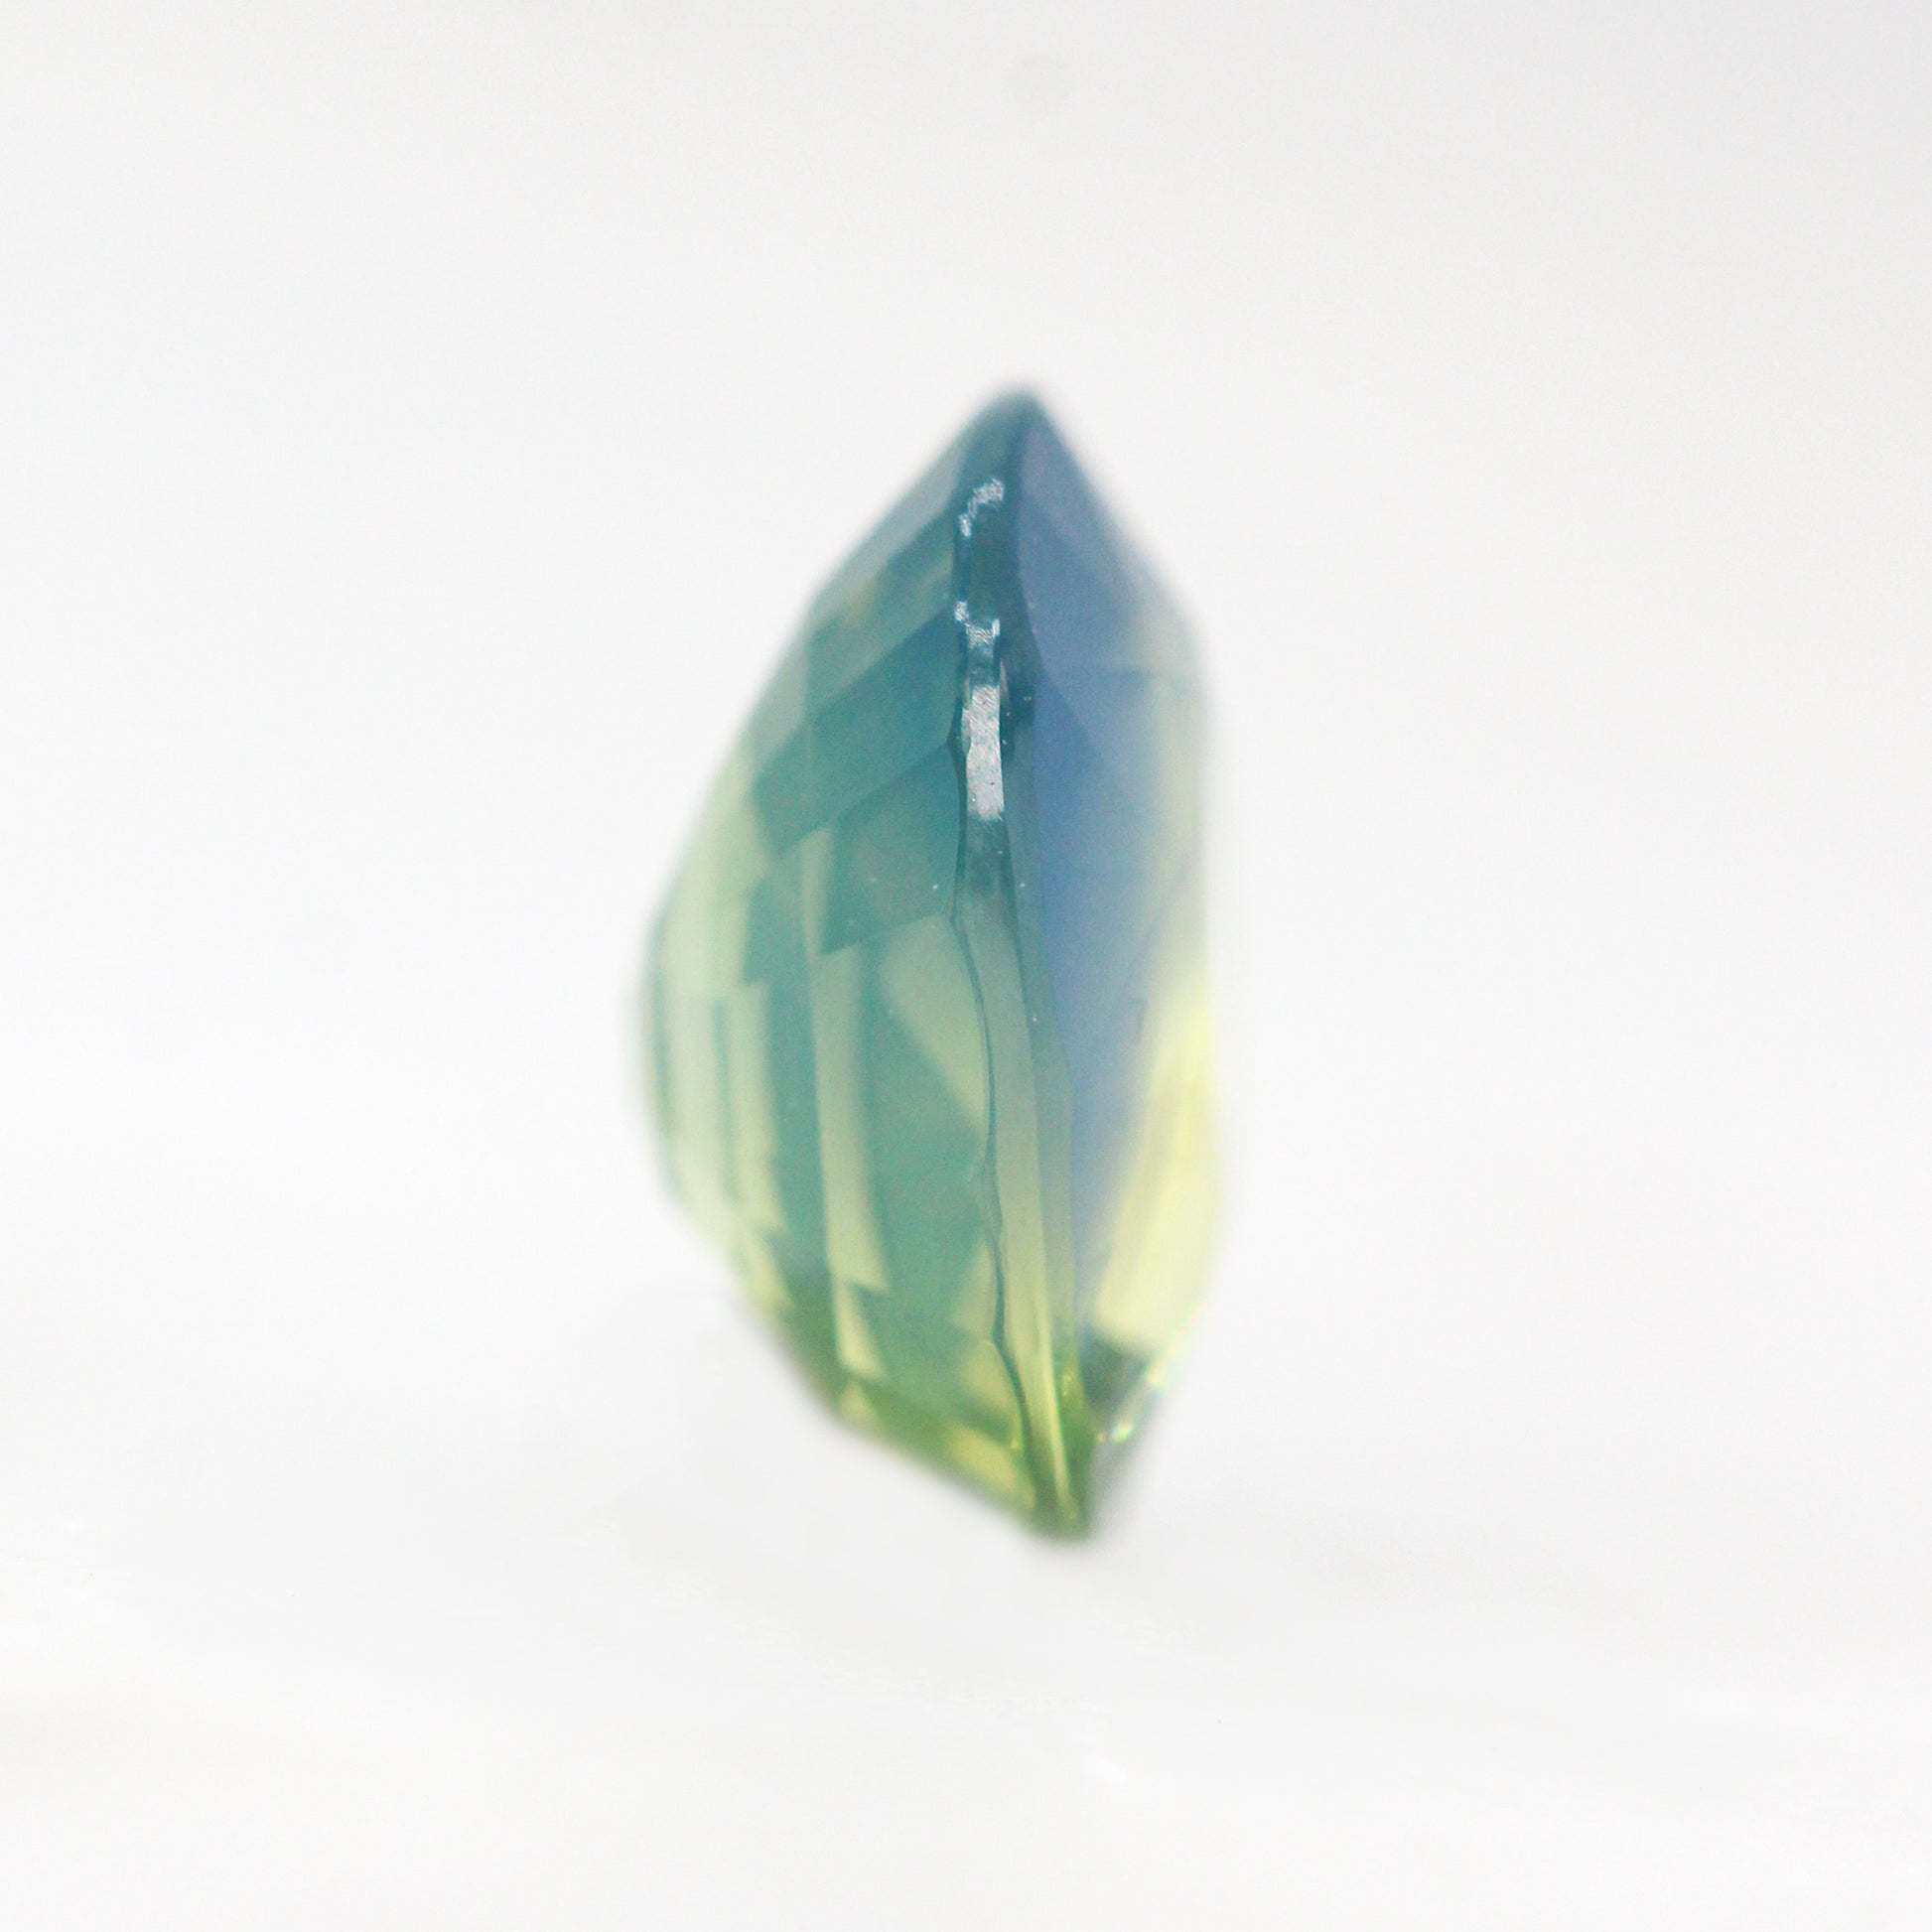 3.05 Carat Multicolor Green, Blue and Yellow Opalescent Oval Sapphire for Custom Work - Inventory Code MCOS305 - Midwinter Co. Alternative Bridal Rings and Modern Fine Jewelry